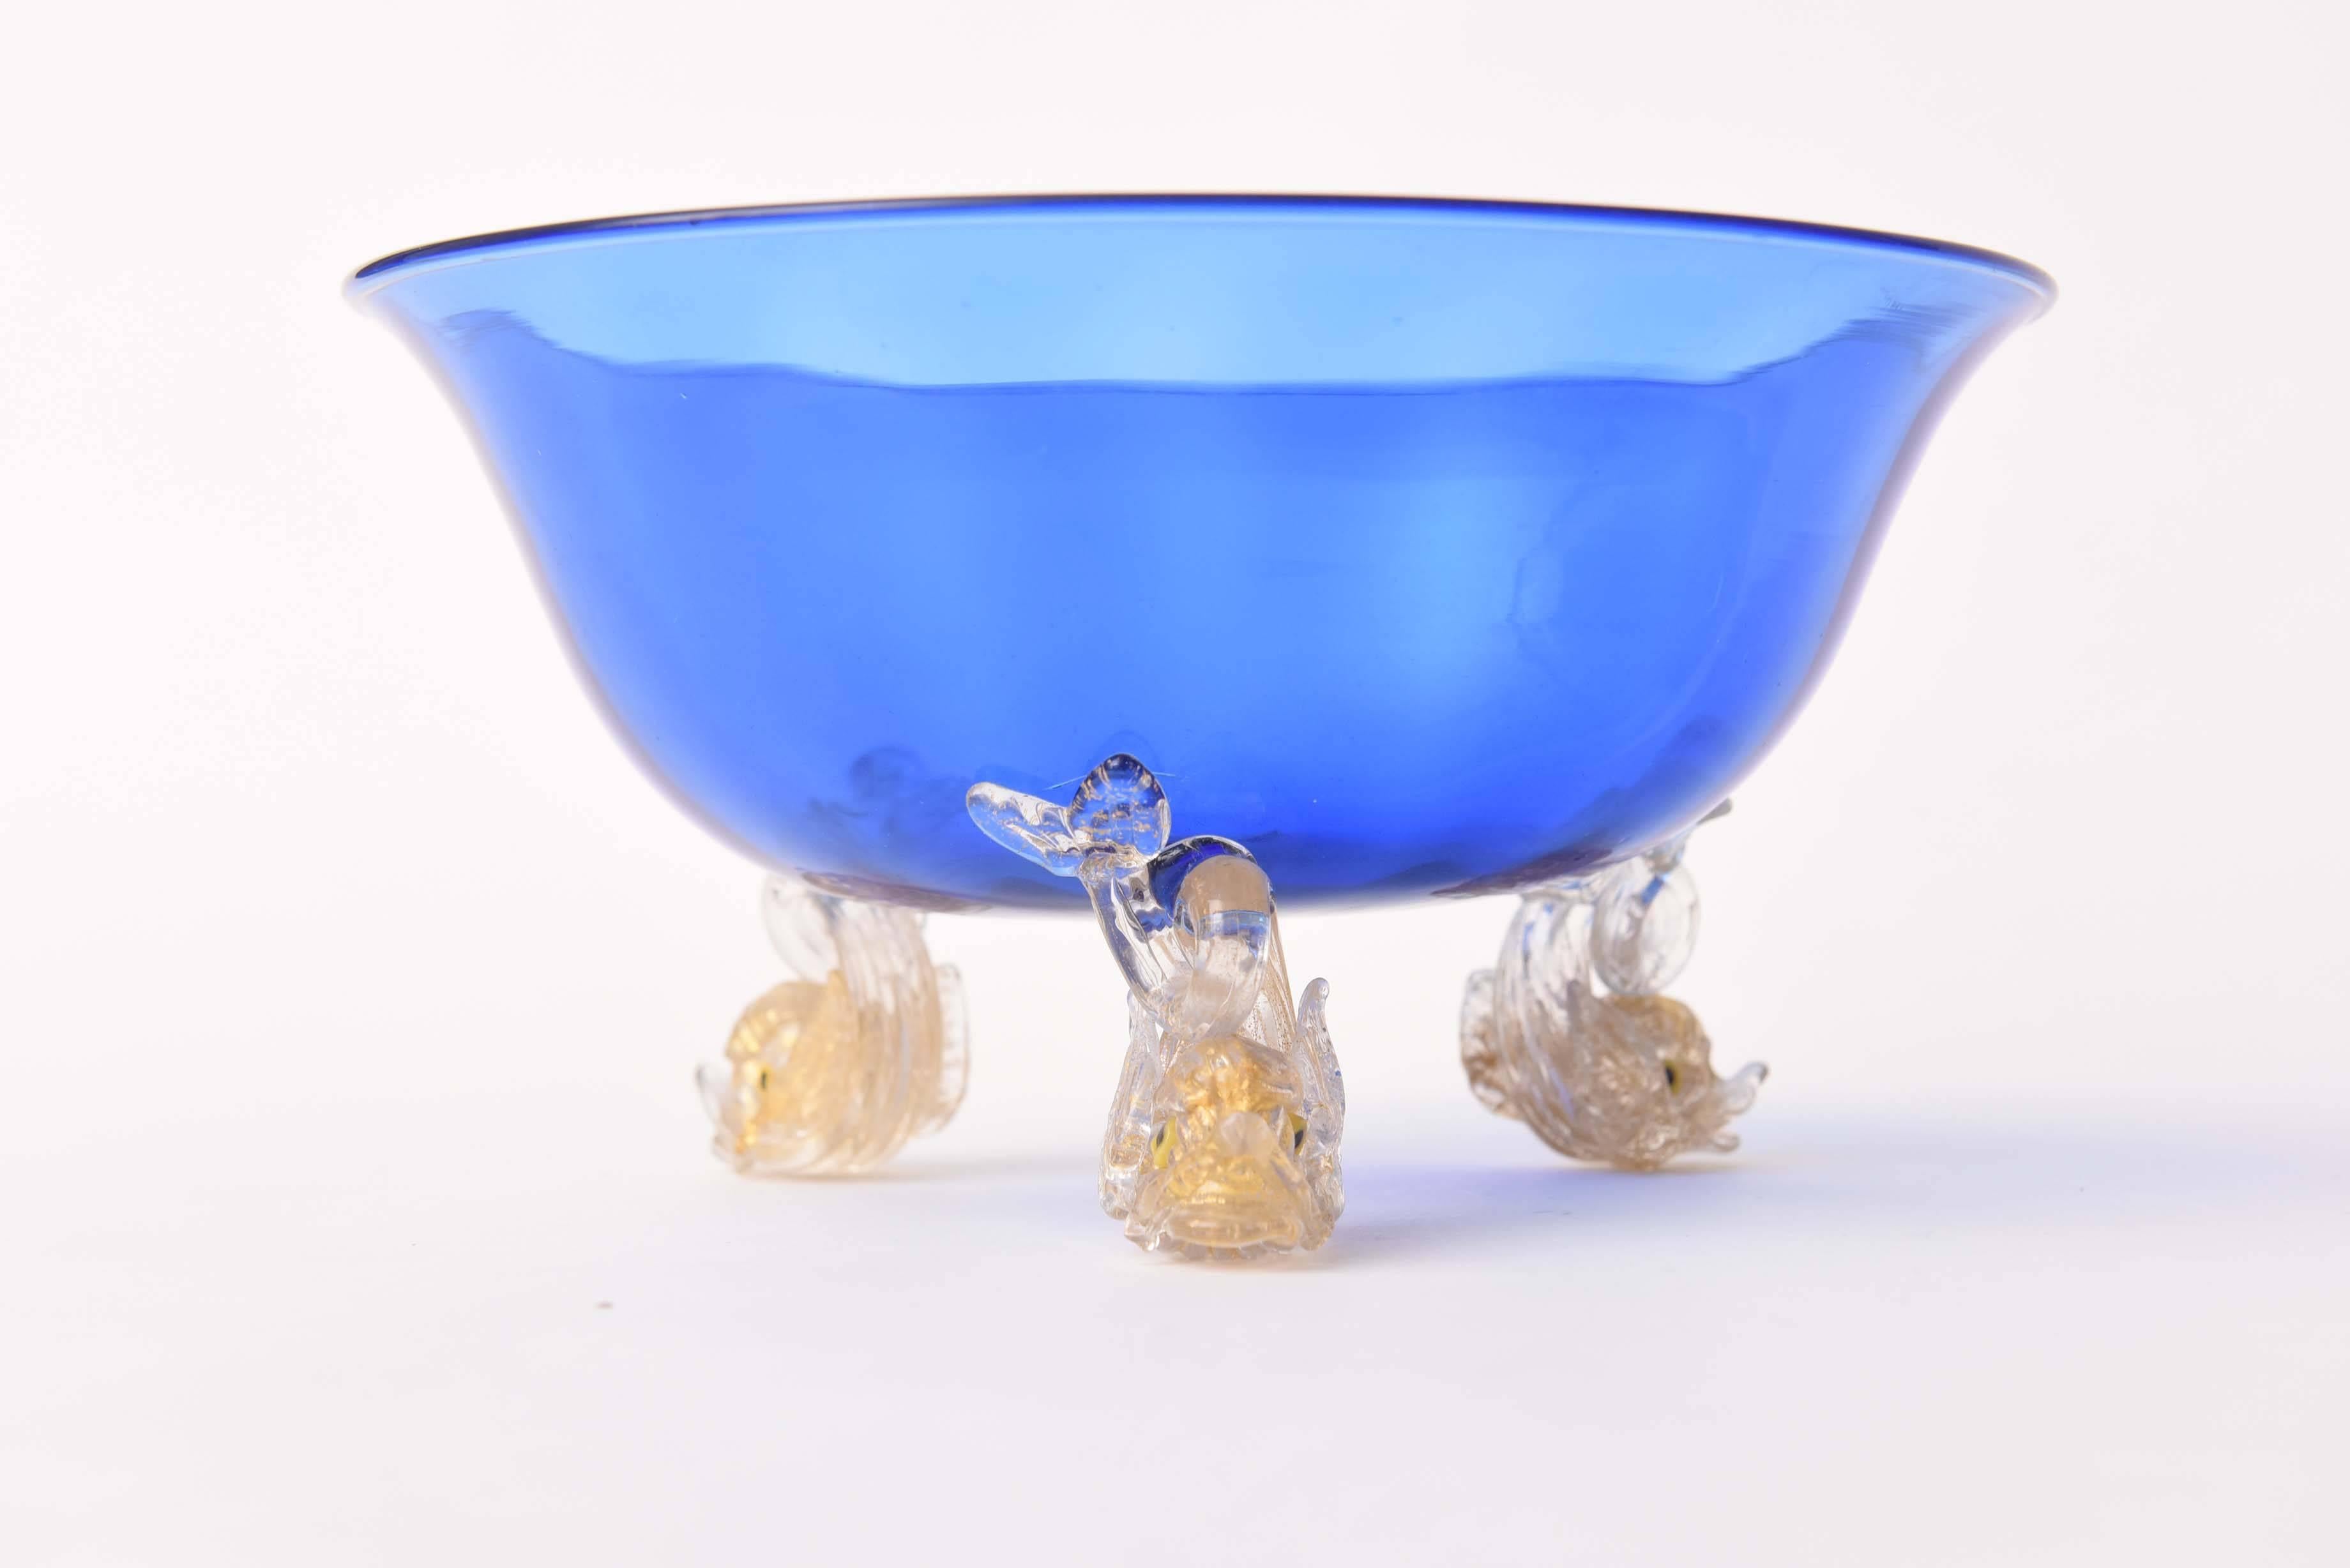 Hand-Crafted Venetian Glass Cobalt Blue Gold Dolphin Foot Centerpiece Bowl, Vintage